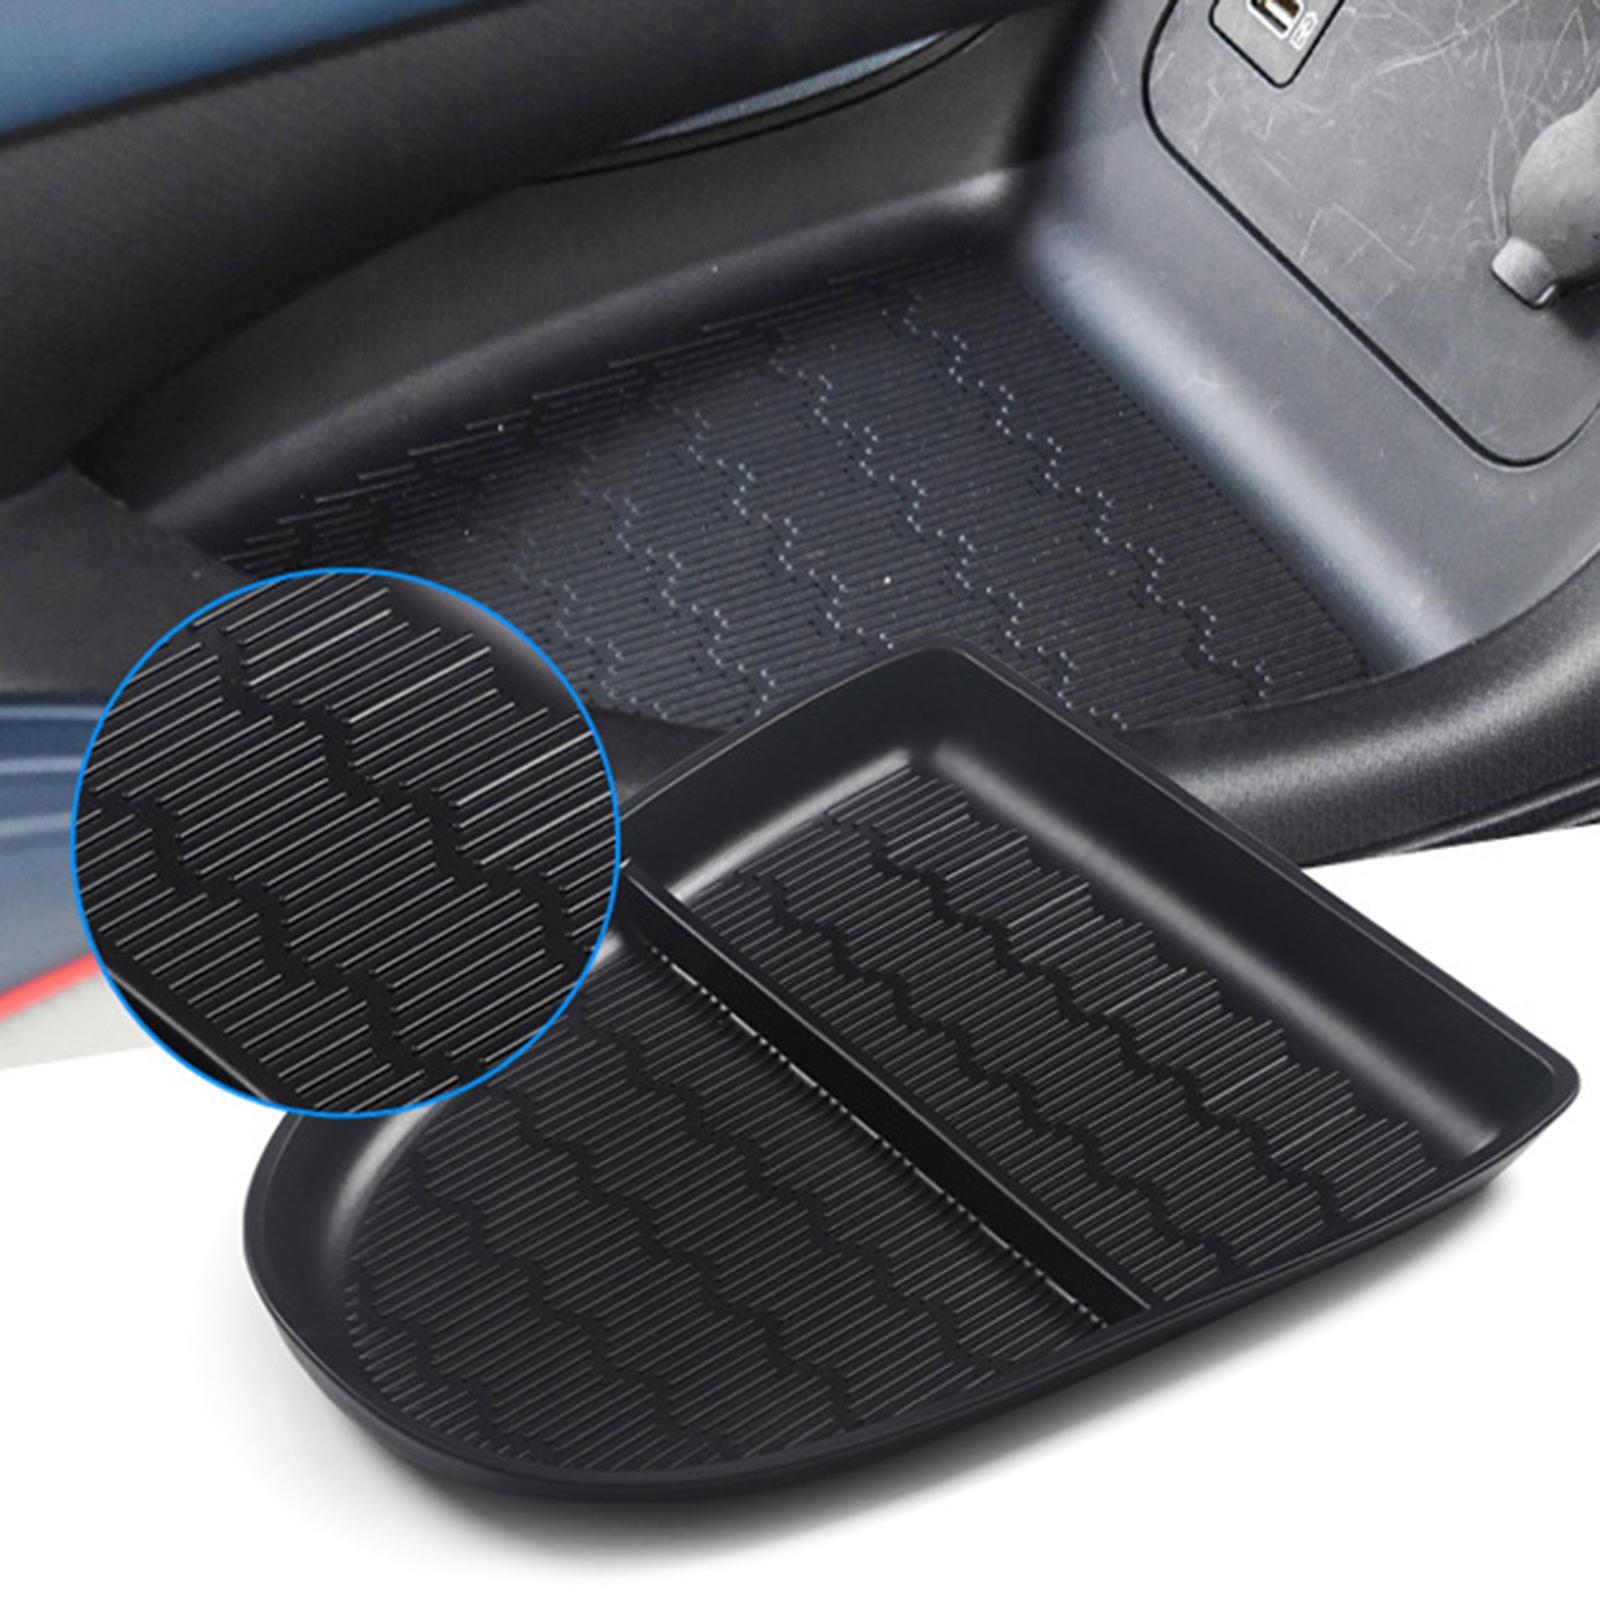 Center Console Organizer Washable Phones Holder for Byd Yuan Plus